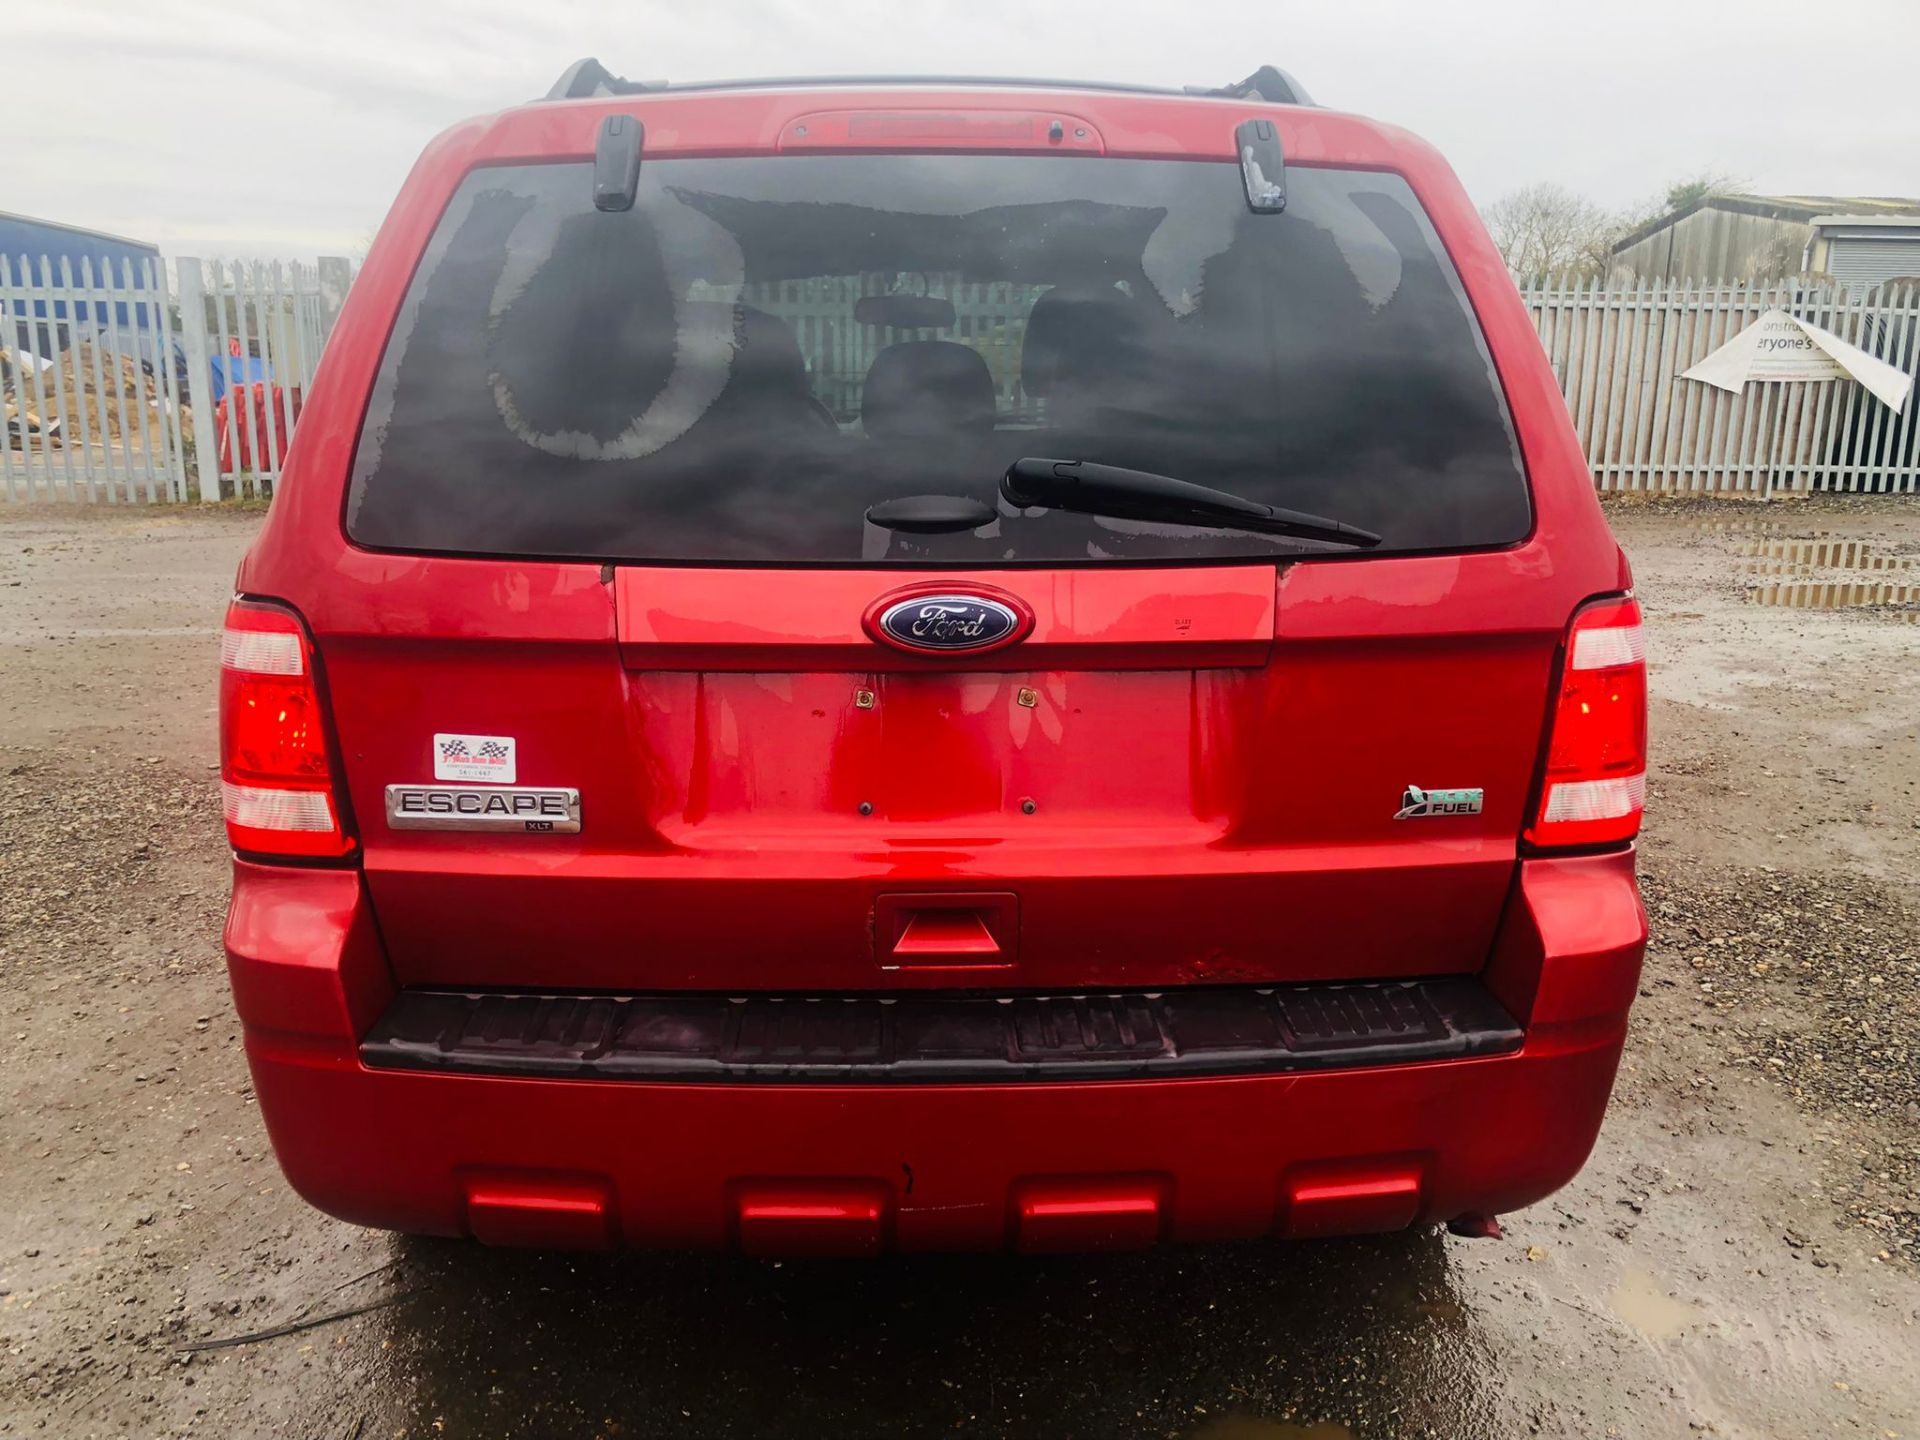 Ford Escape XLT 3.0L V6 ' 2011 Year ' Auto - A/C - Winter Pack - Left hand Drive - Image 10 of 21